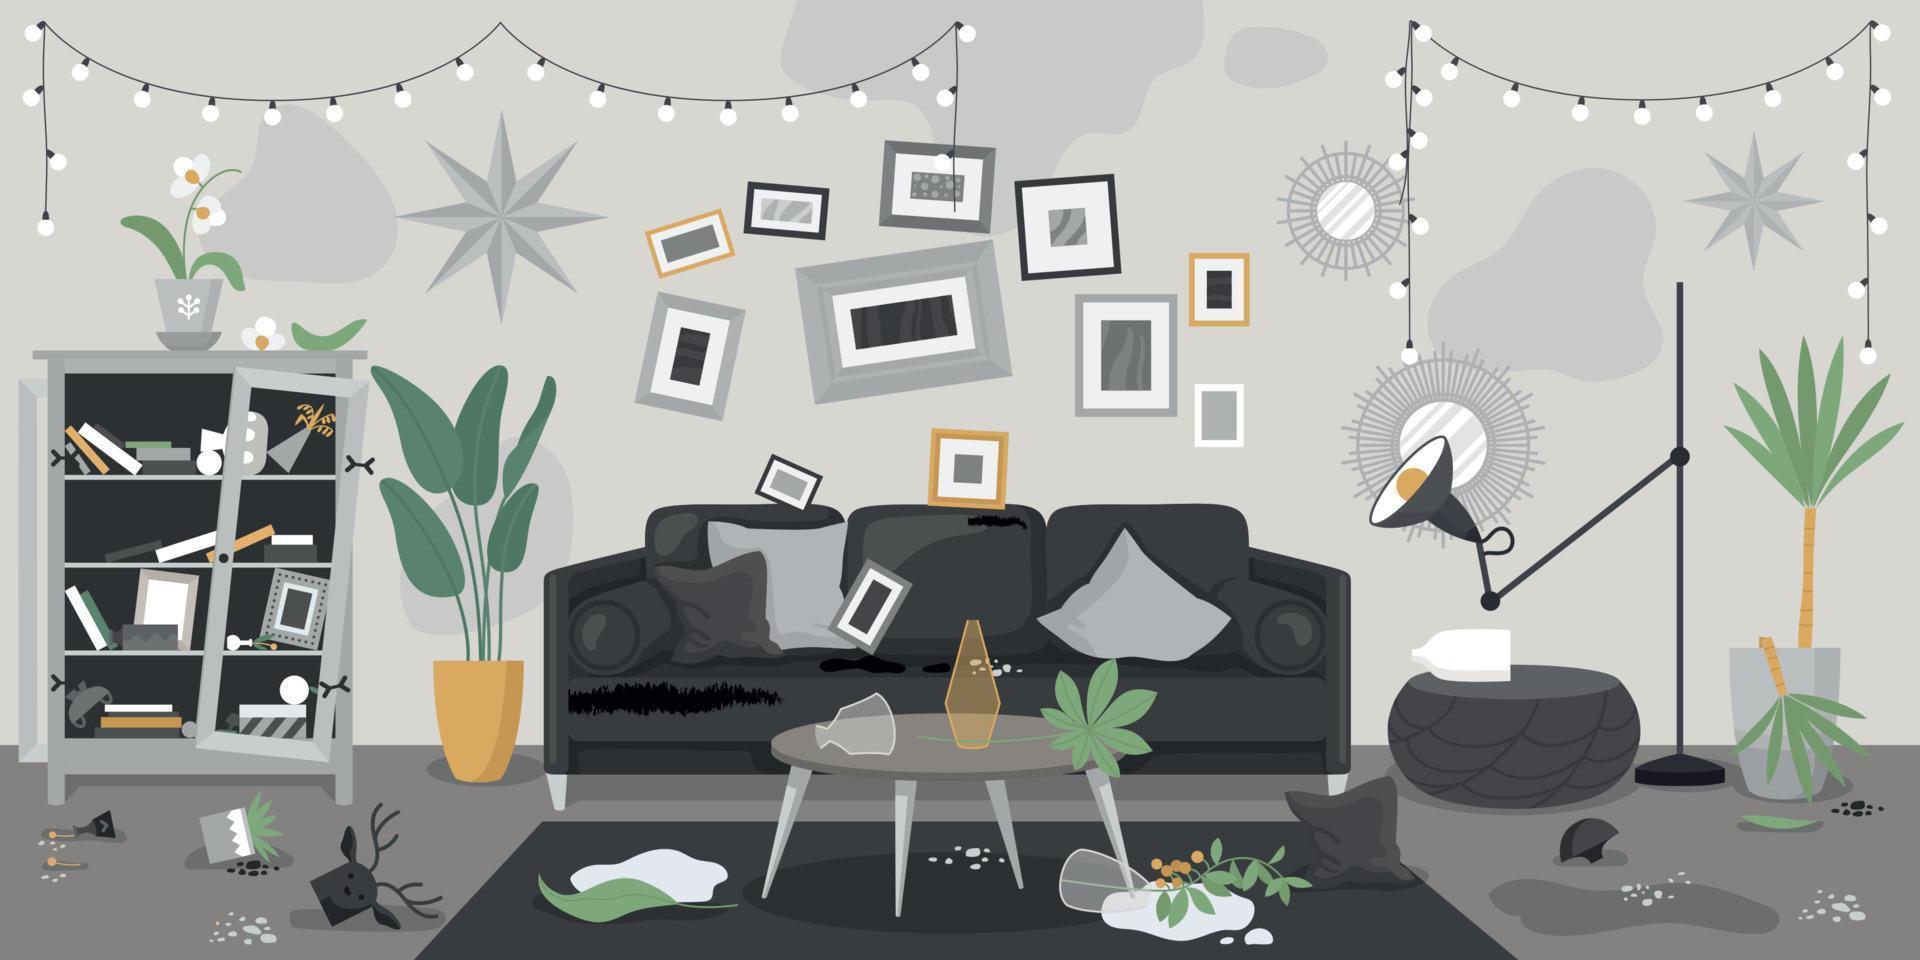 Dirty Room Interior Composition vector